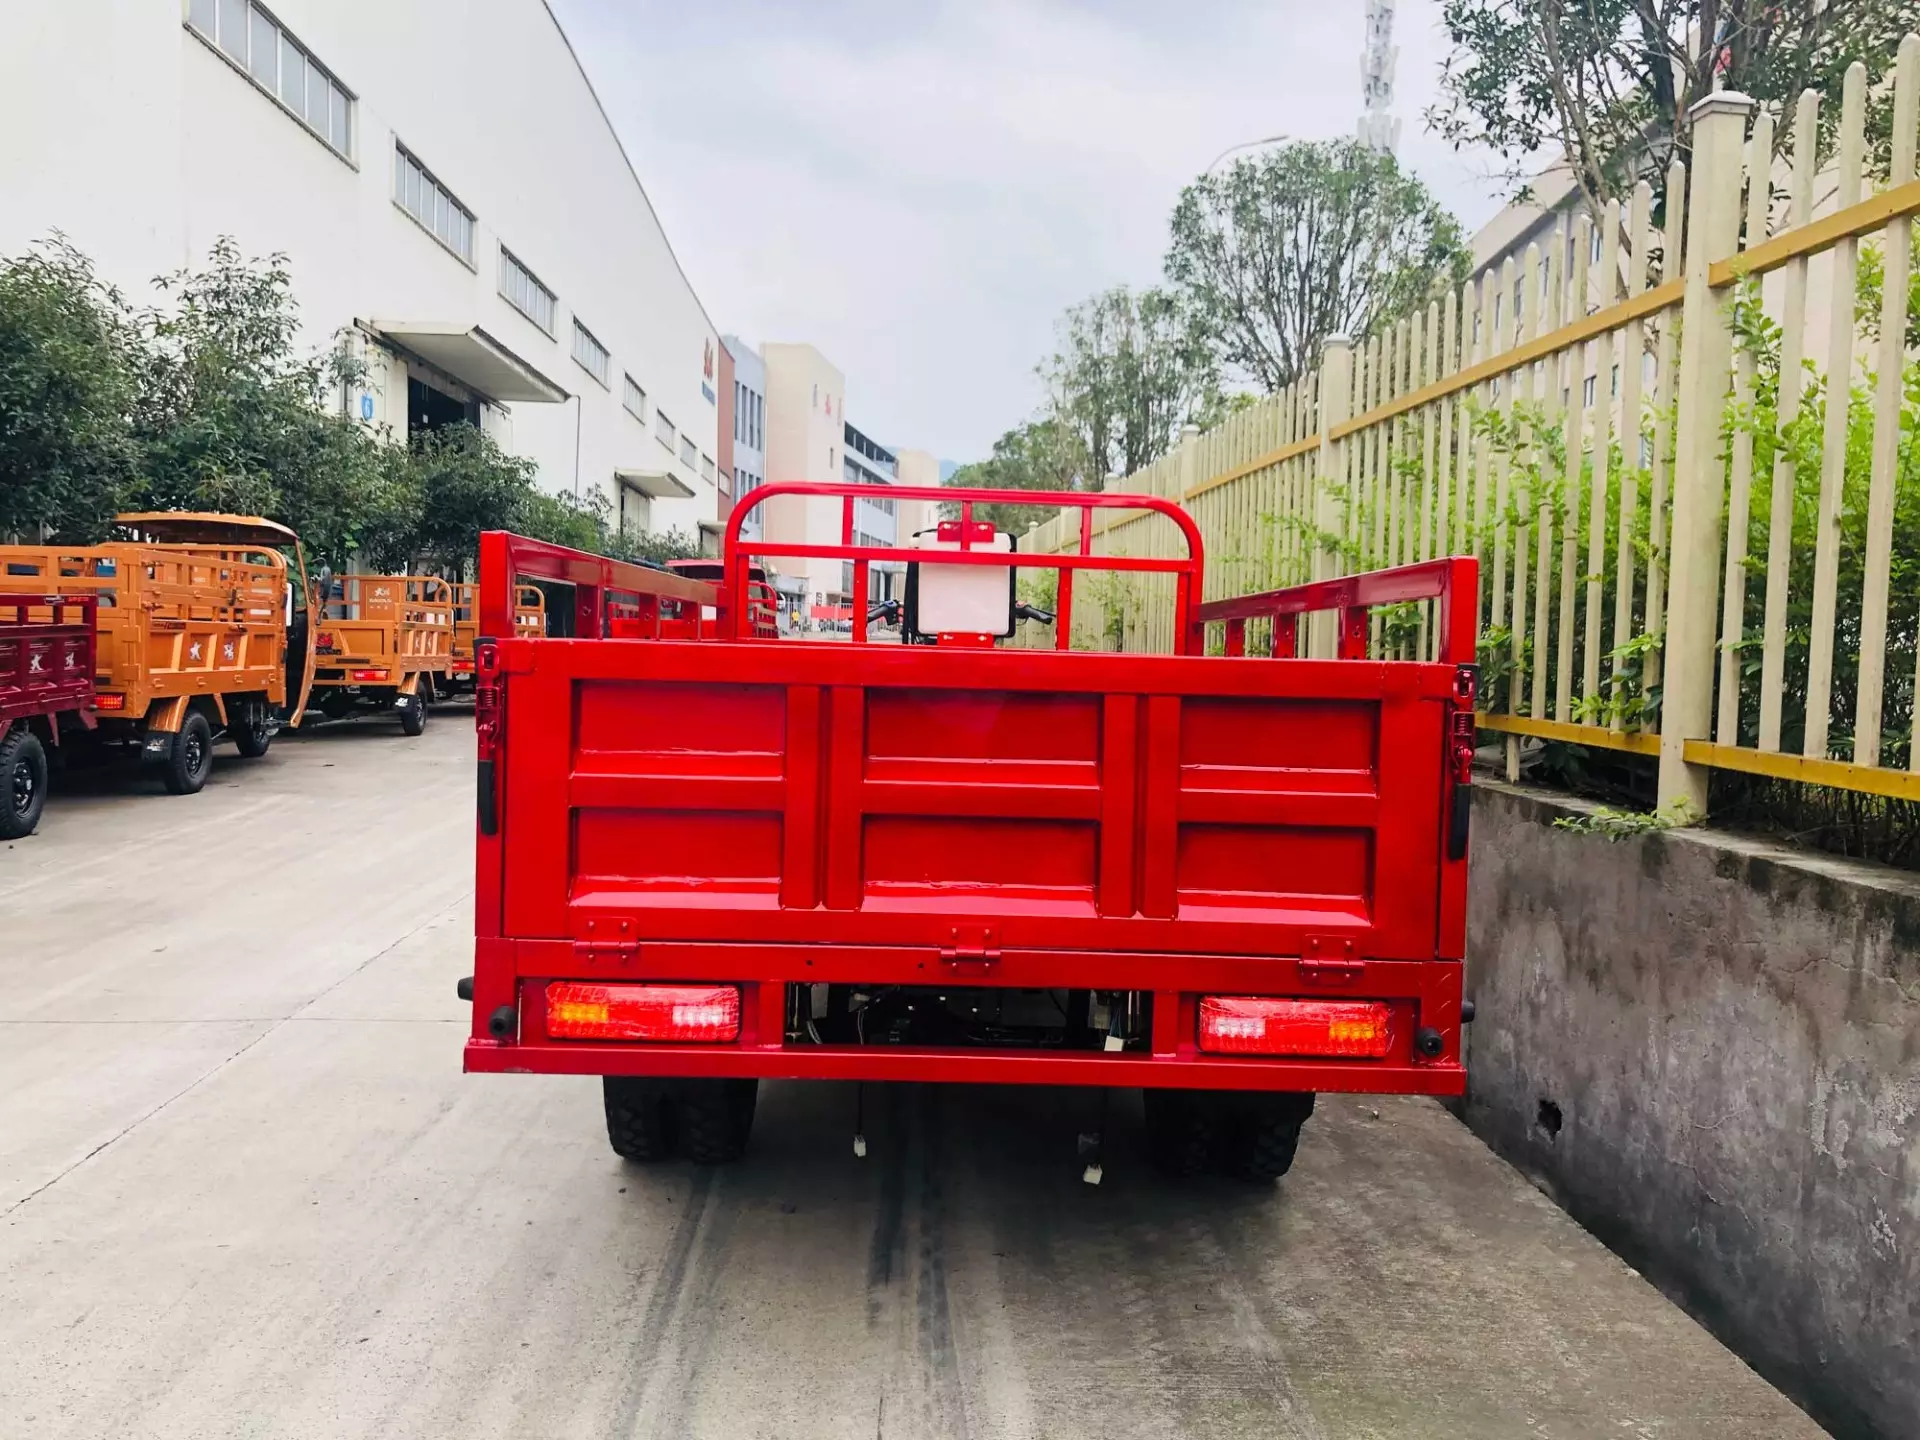 China DAYANG 3 wheels farm vehicle heavy duty loading motorcycles 20cc power engine tricycle red body box packing color brake